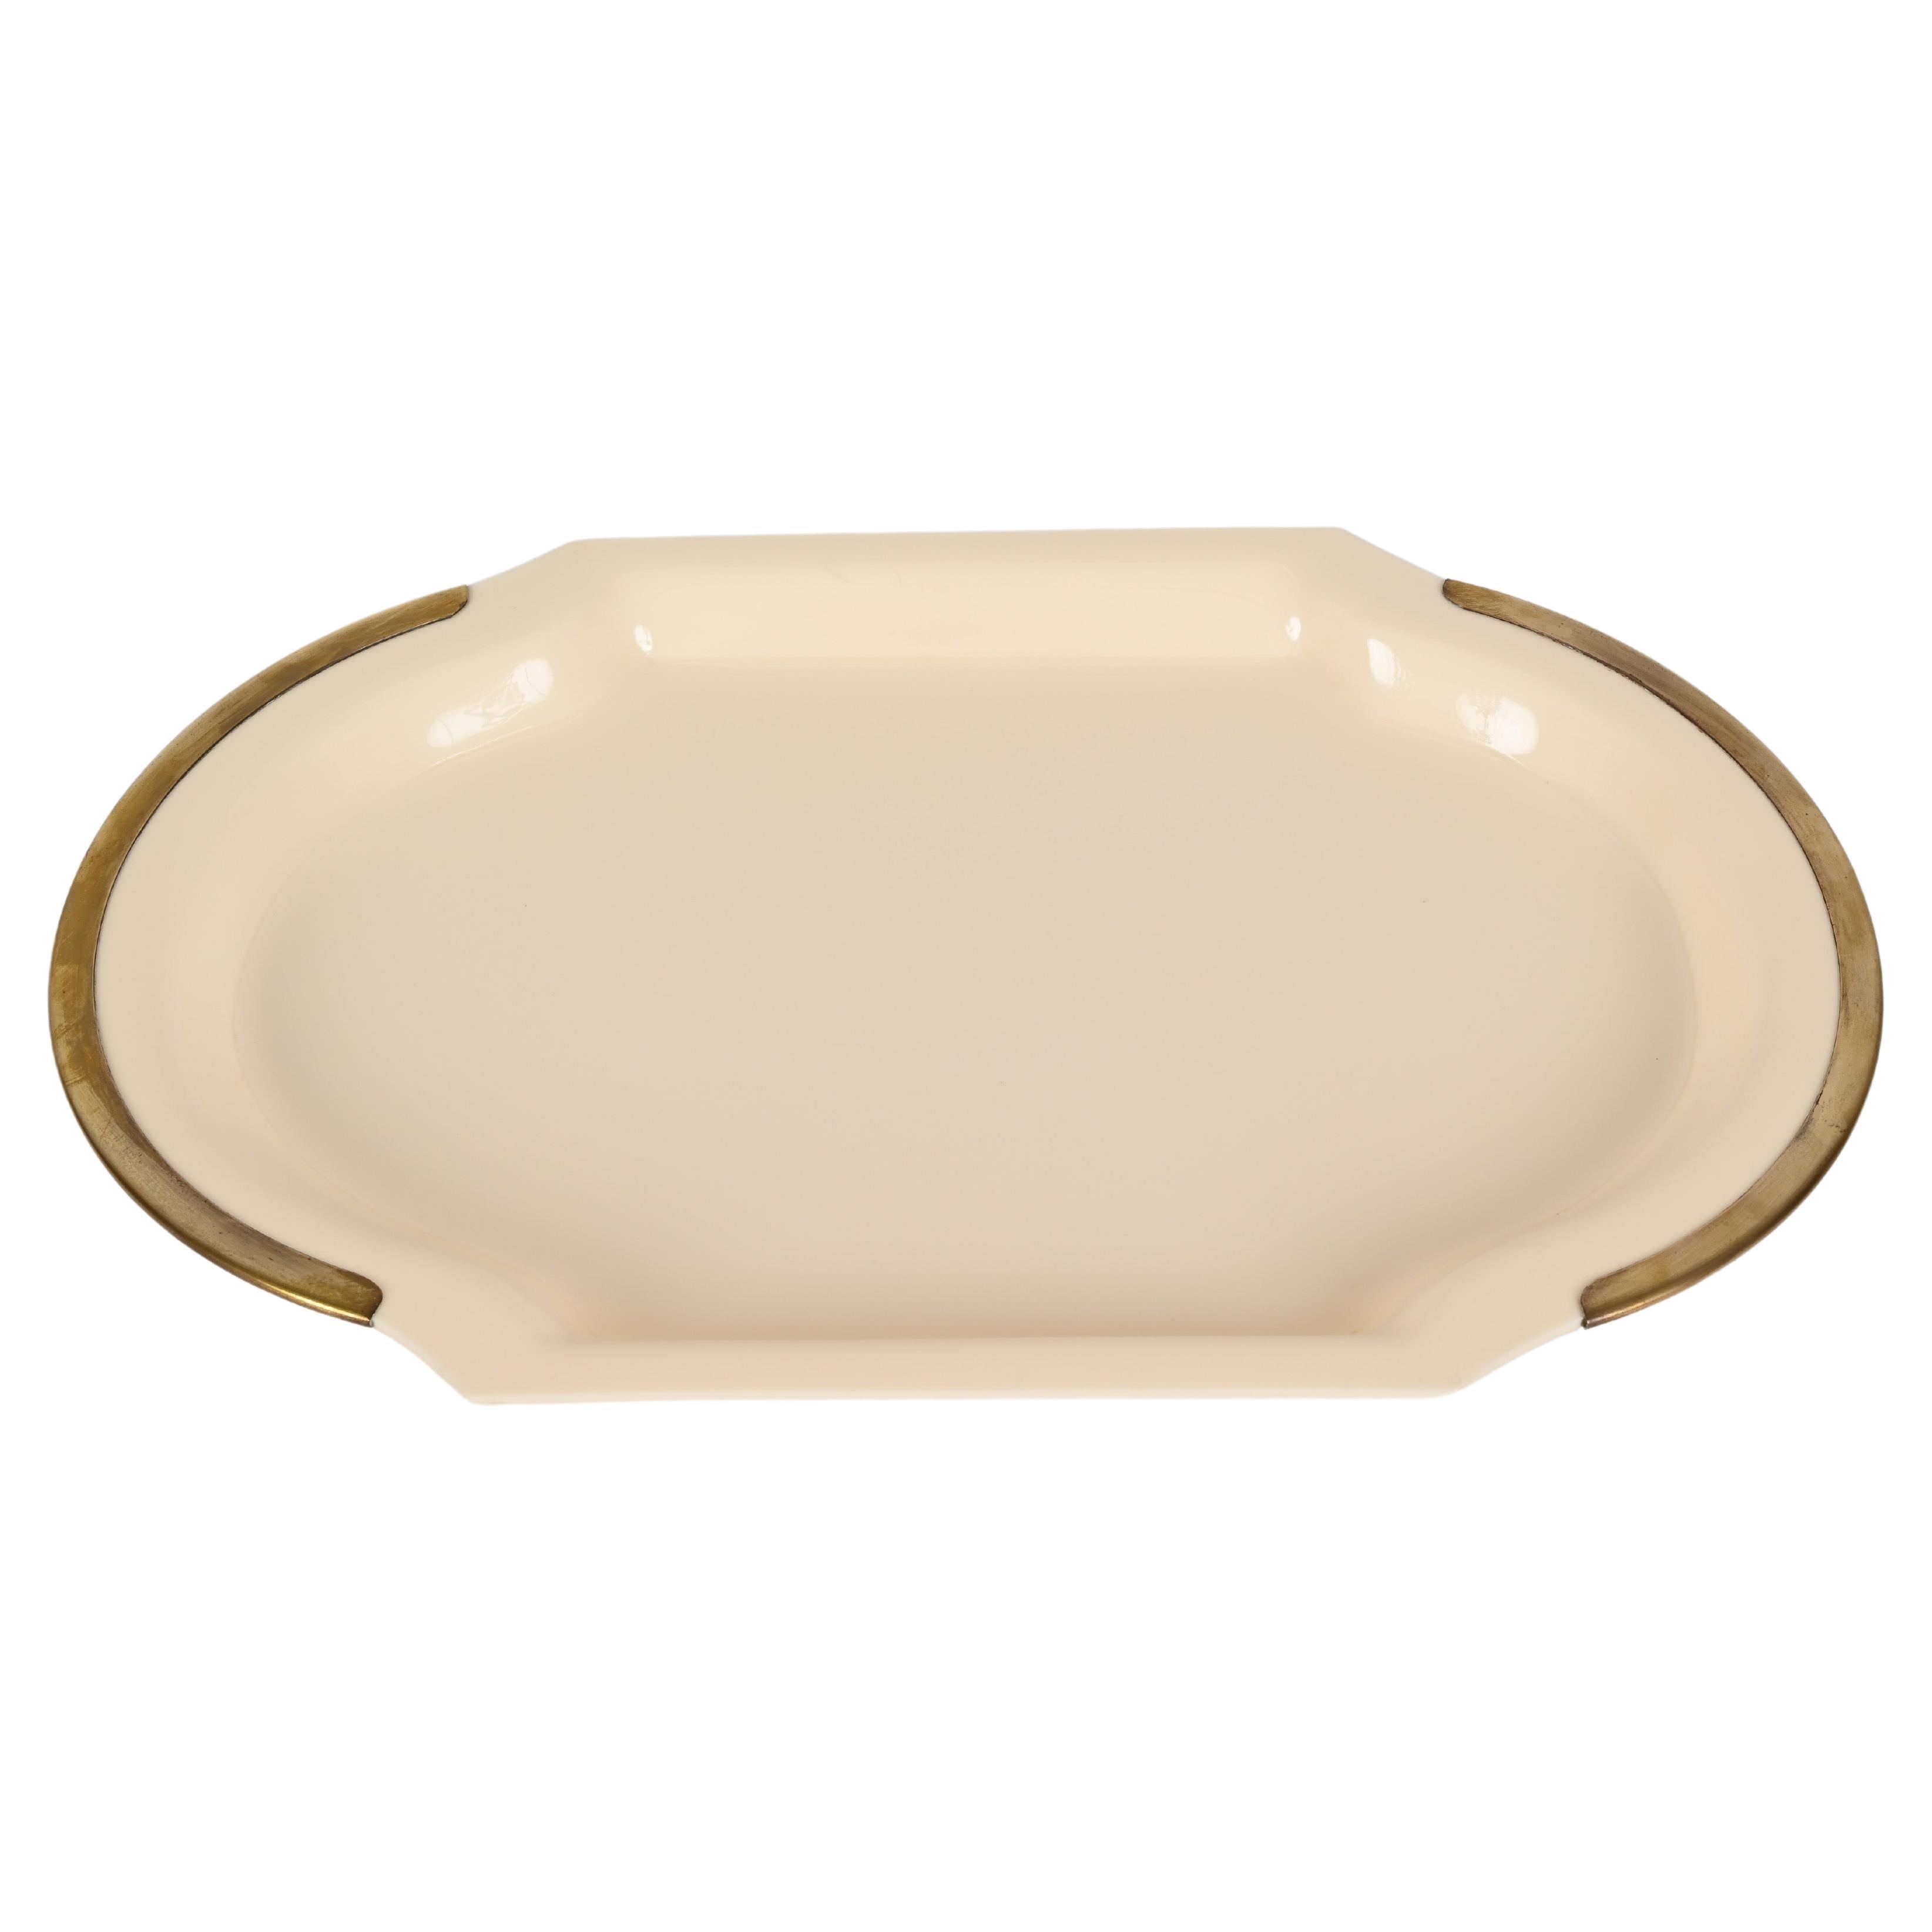 Mid-Century Oval Serving Tray in Brass and Cream-Colored Plexiglass, Italy 1980s